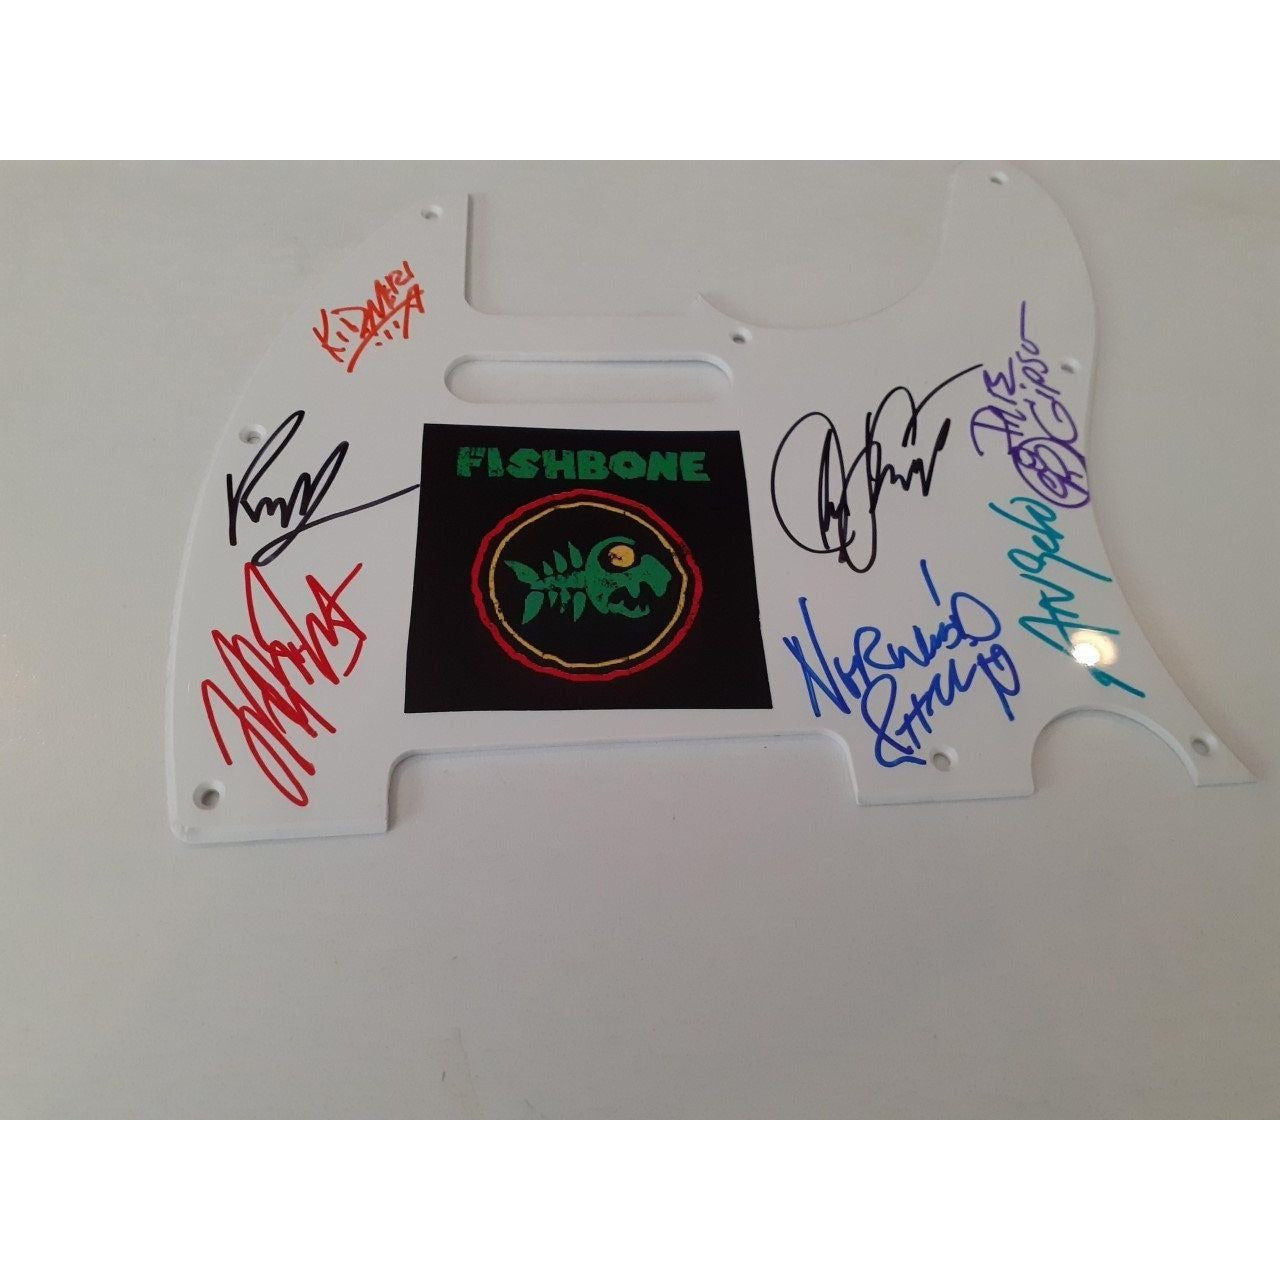 Fishbone Angelo Moore Norwood Fisher Rocky George signed pickguard